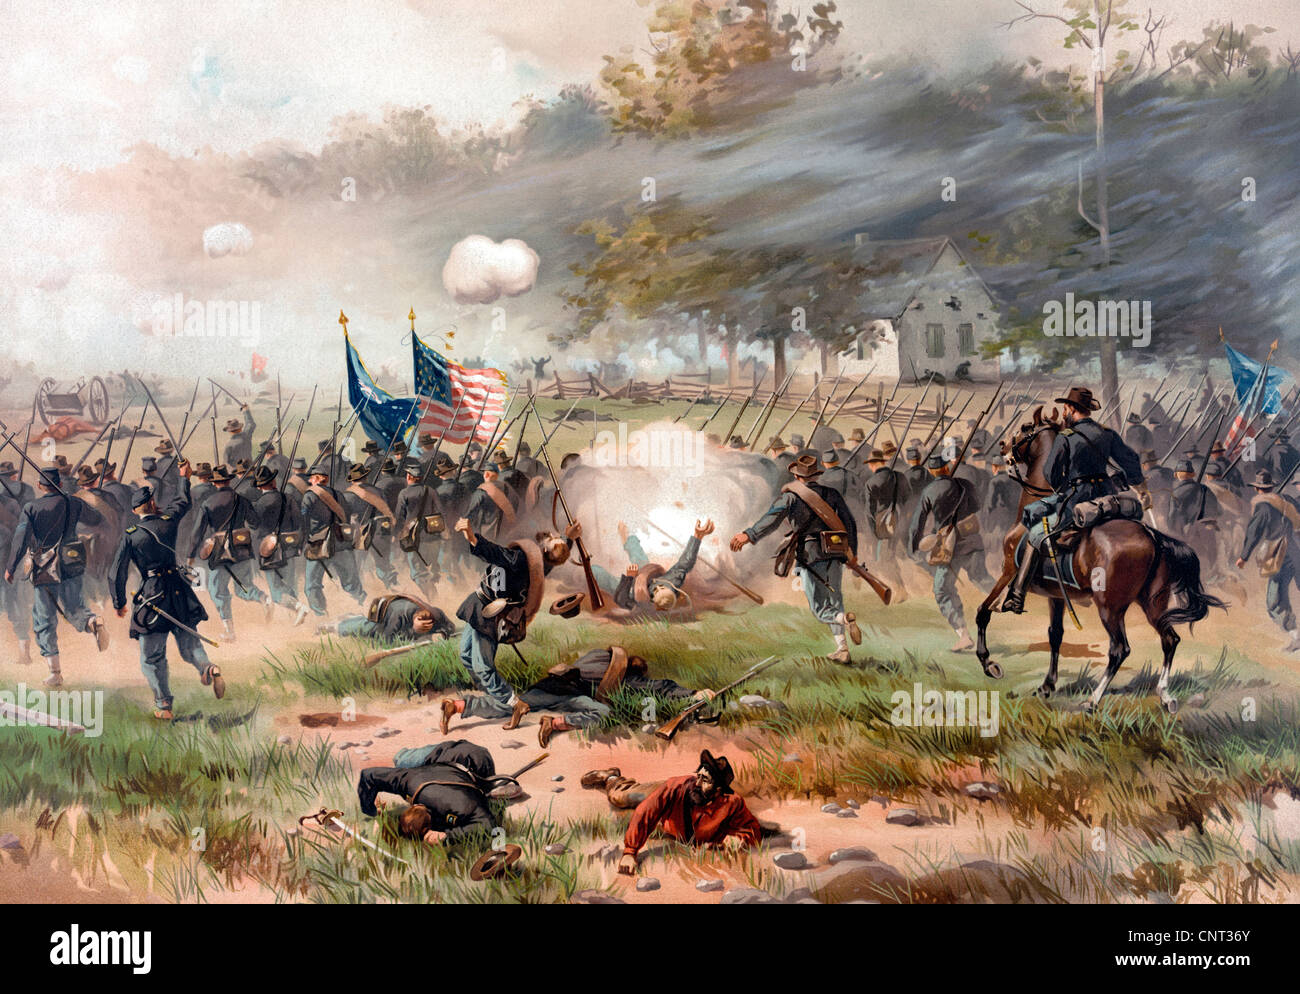 Vintage Civil War painting of Union and Confederate troops fighting at The Battle of Antietam. Stock Photo